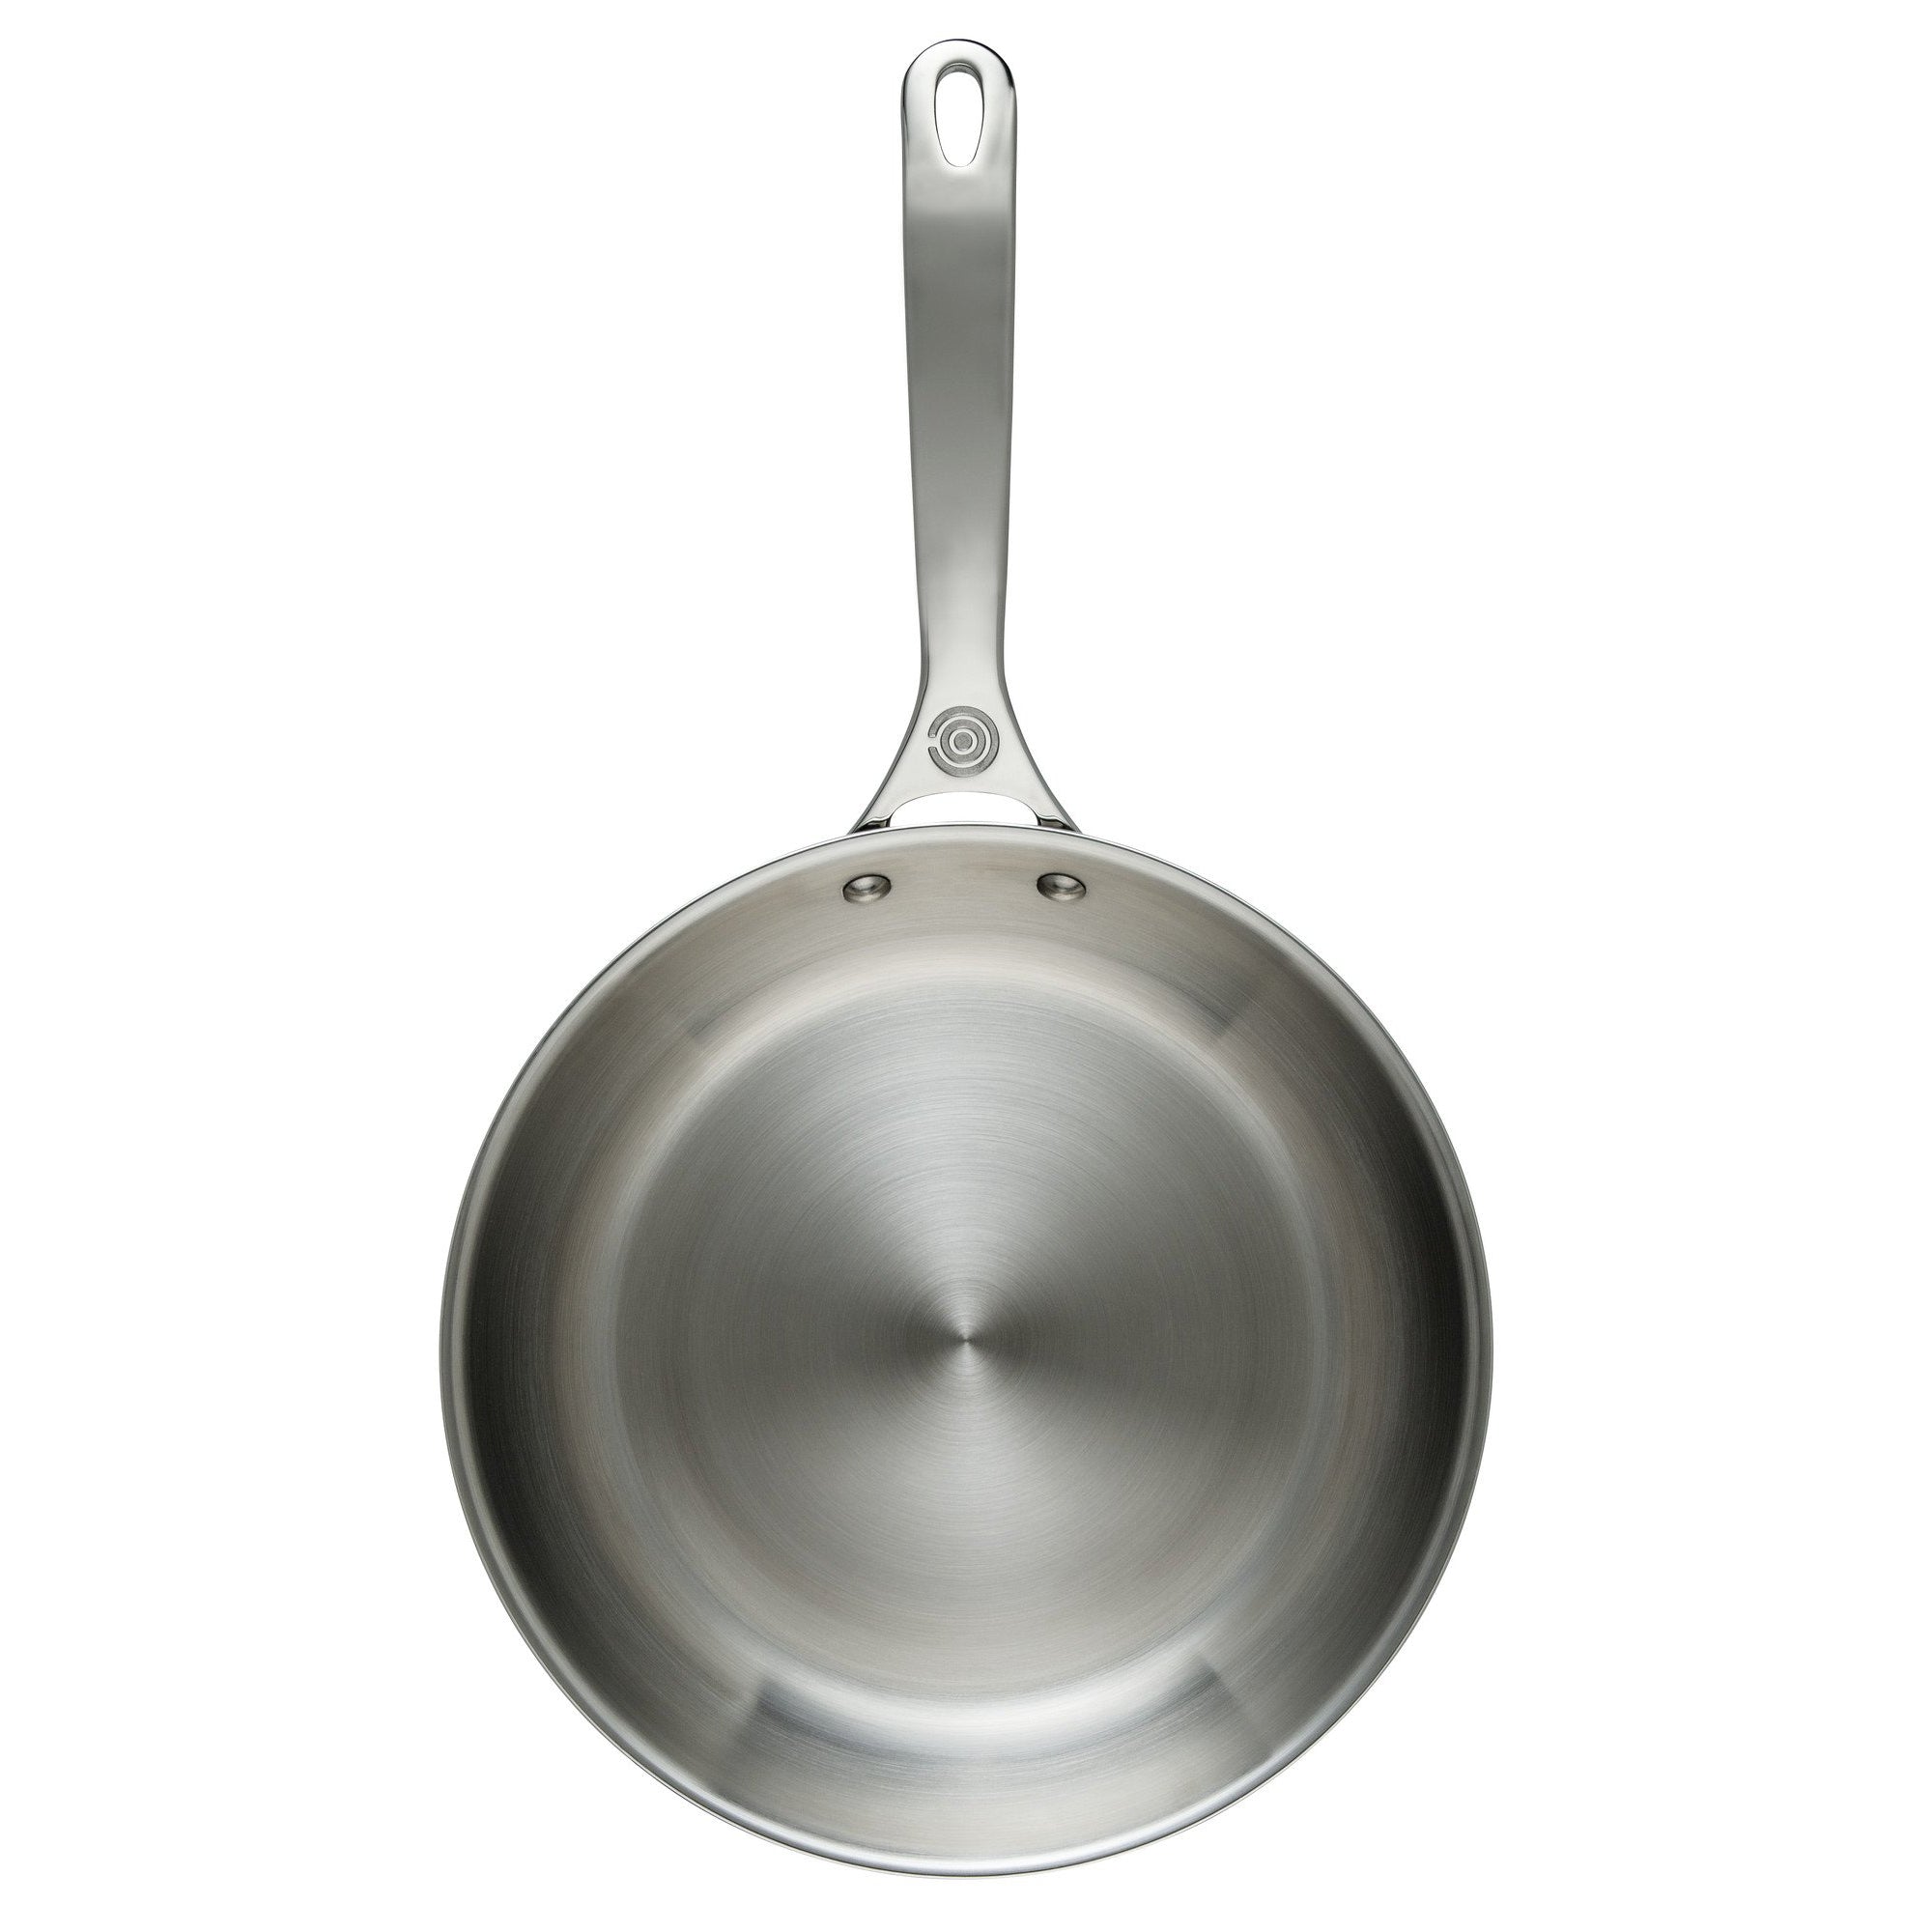 Le Creuset 30 cm Stainless Steel Frying Pan (12") Top View